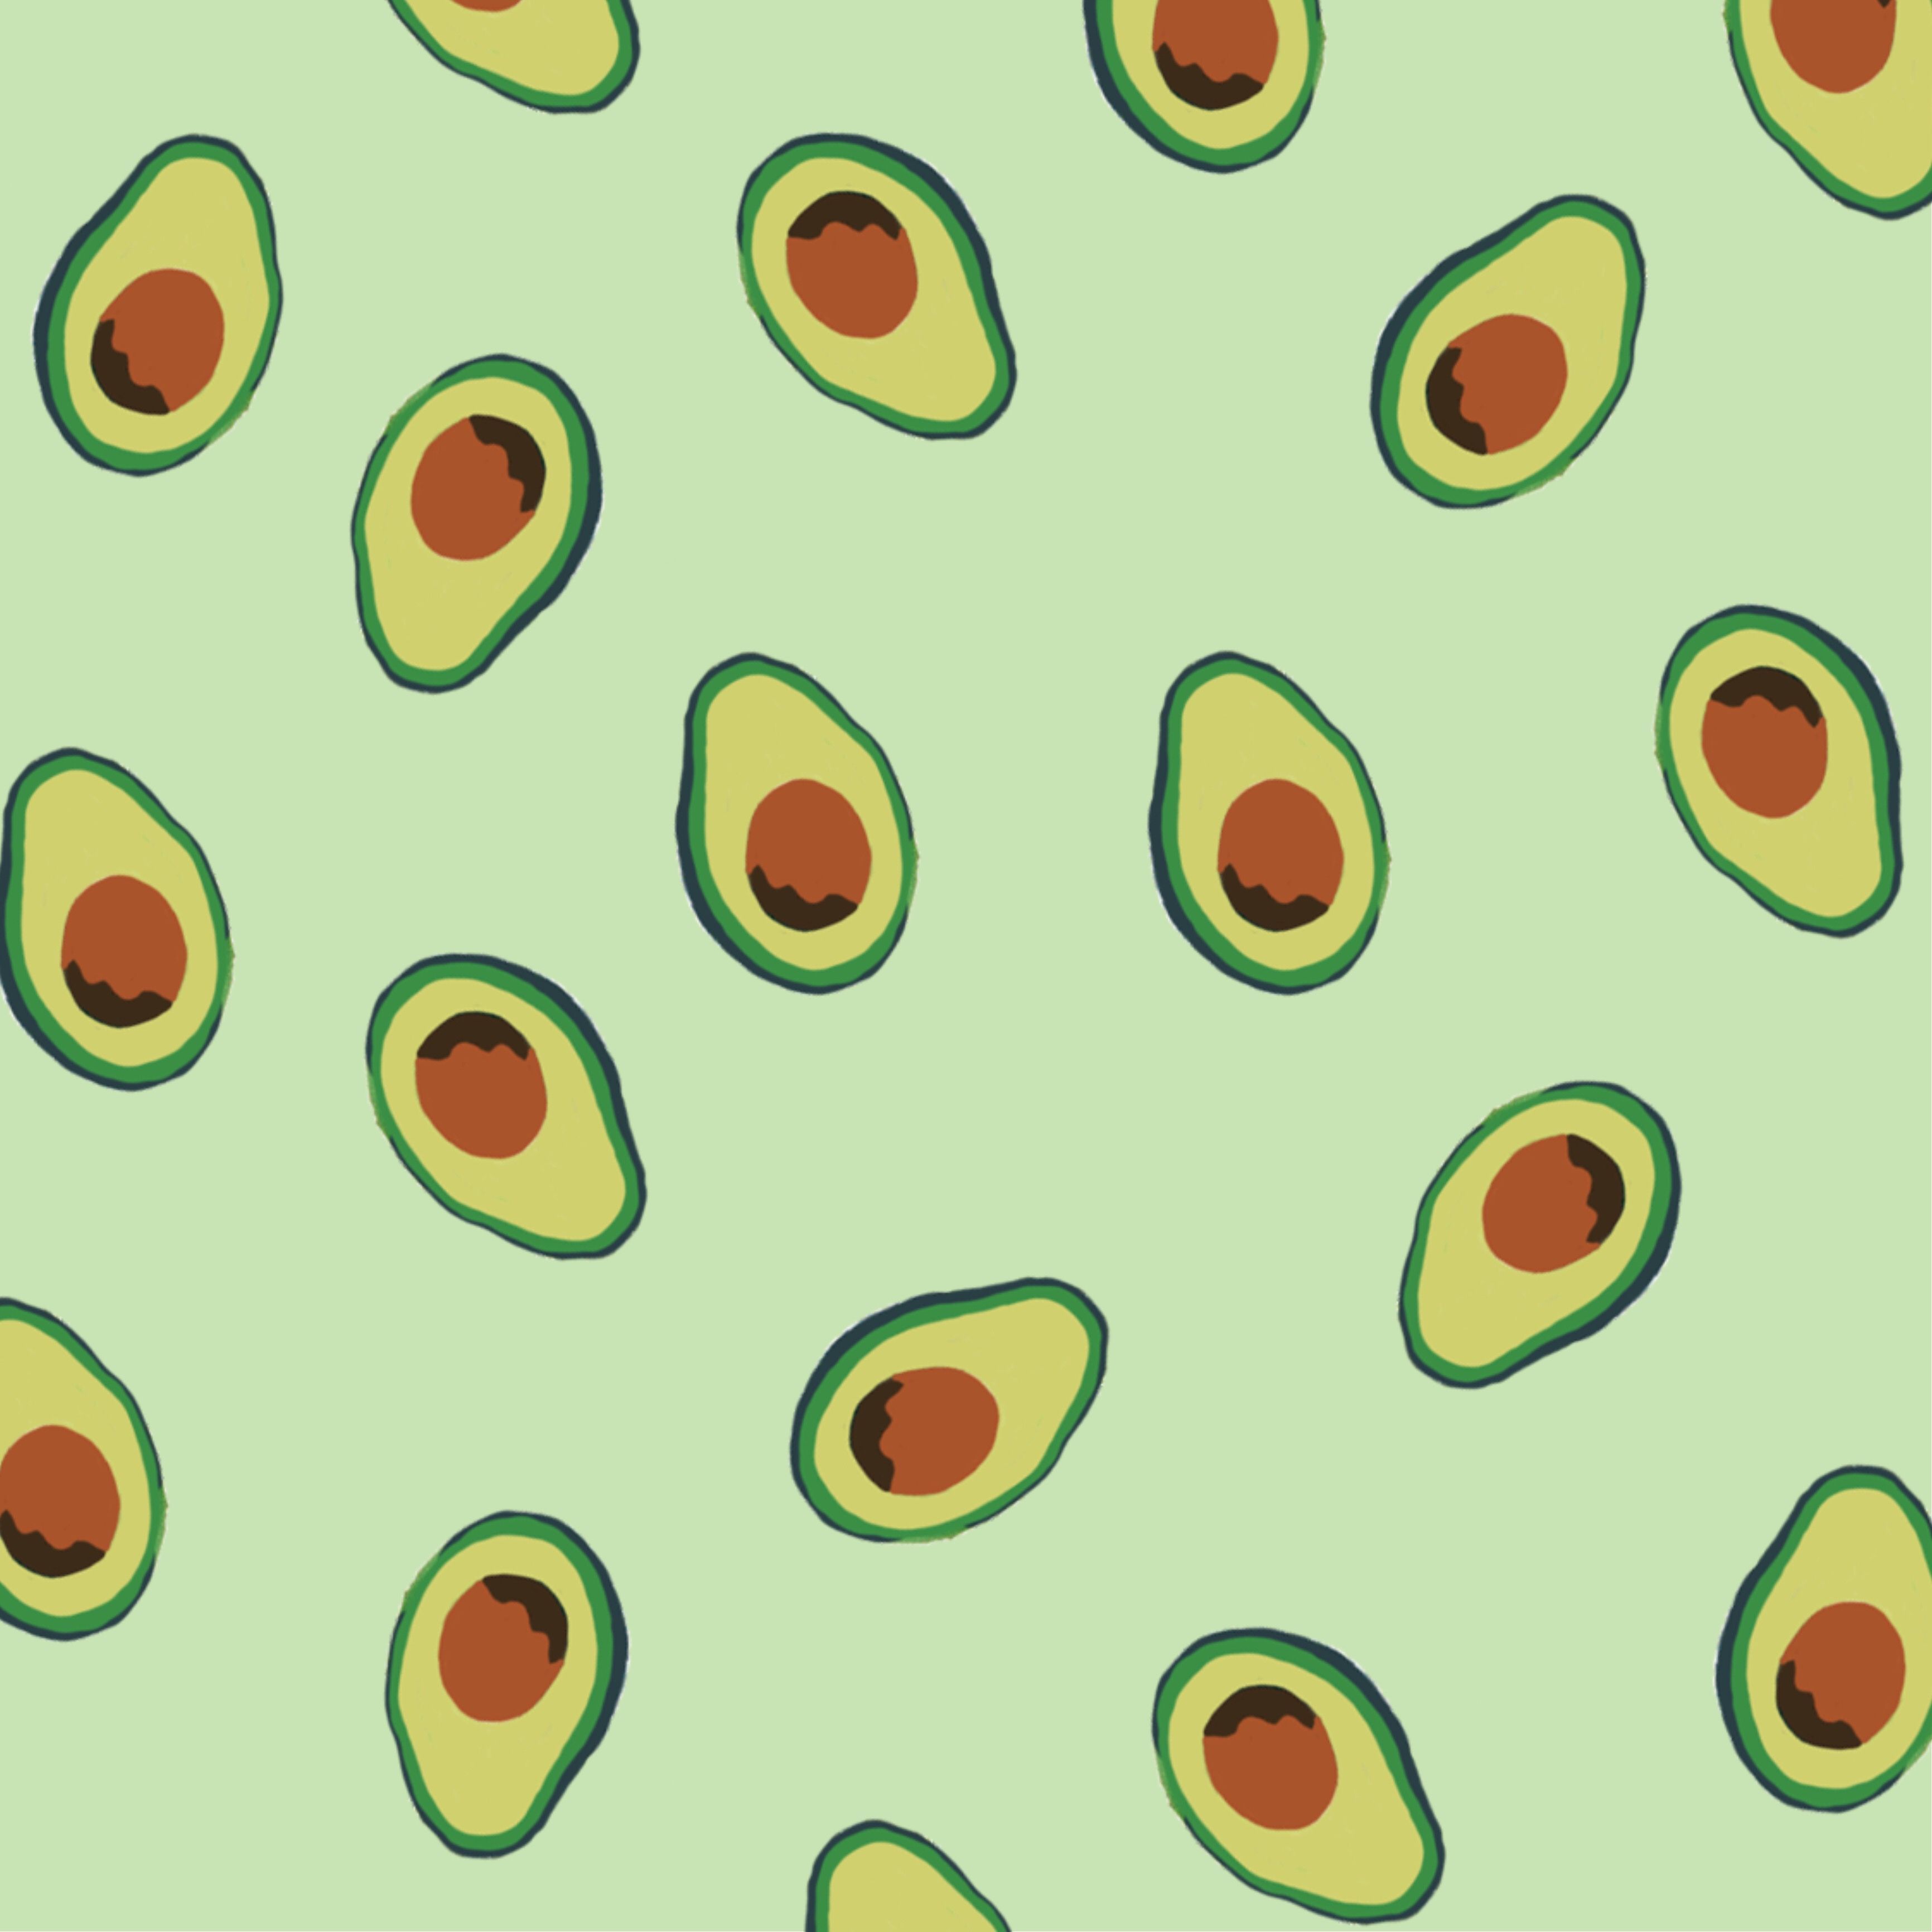 A green patterned background with illustrations of avocado halves. - Green, avocado, fruit